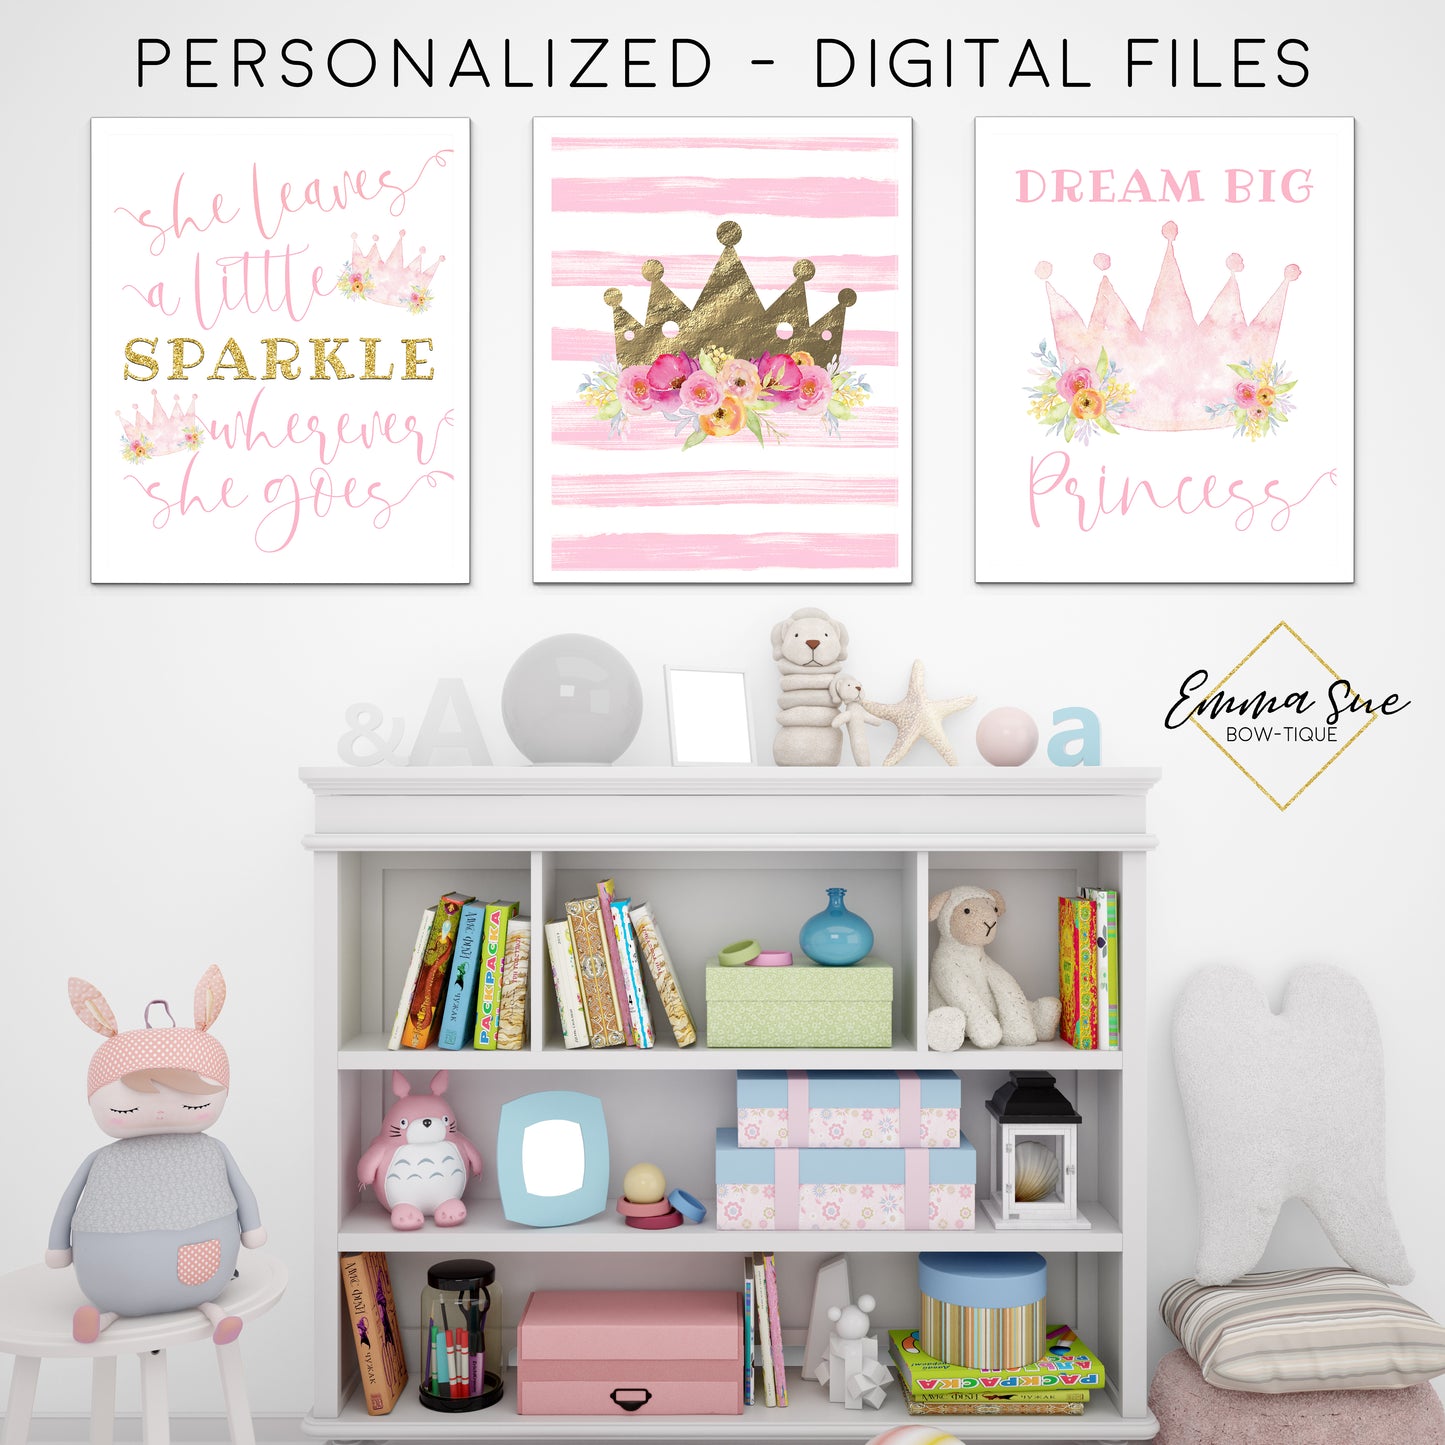 She Leaves a Little Sparkle Wherever She Goes - Dream Big Princess Watercolor Signs - Girl's Playroom - Baby Girl Nursery Printable Wall Art Sign- Digital File